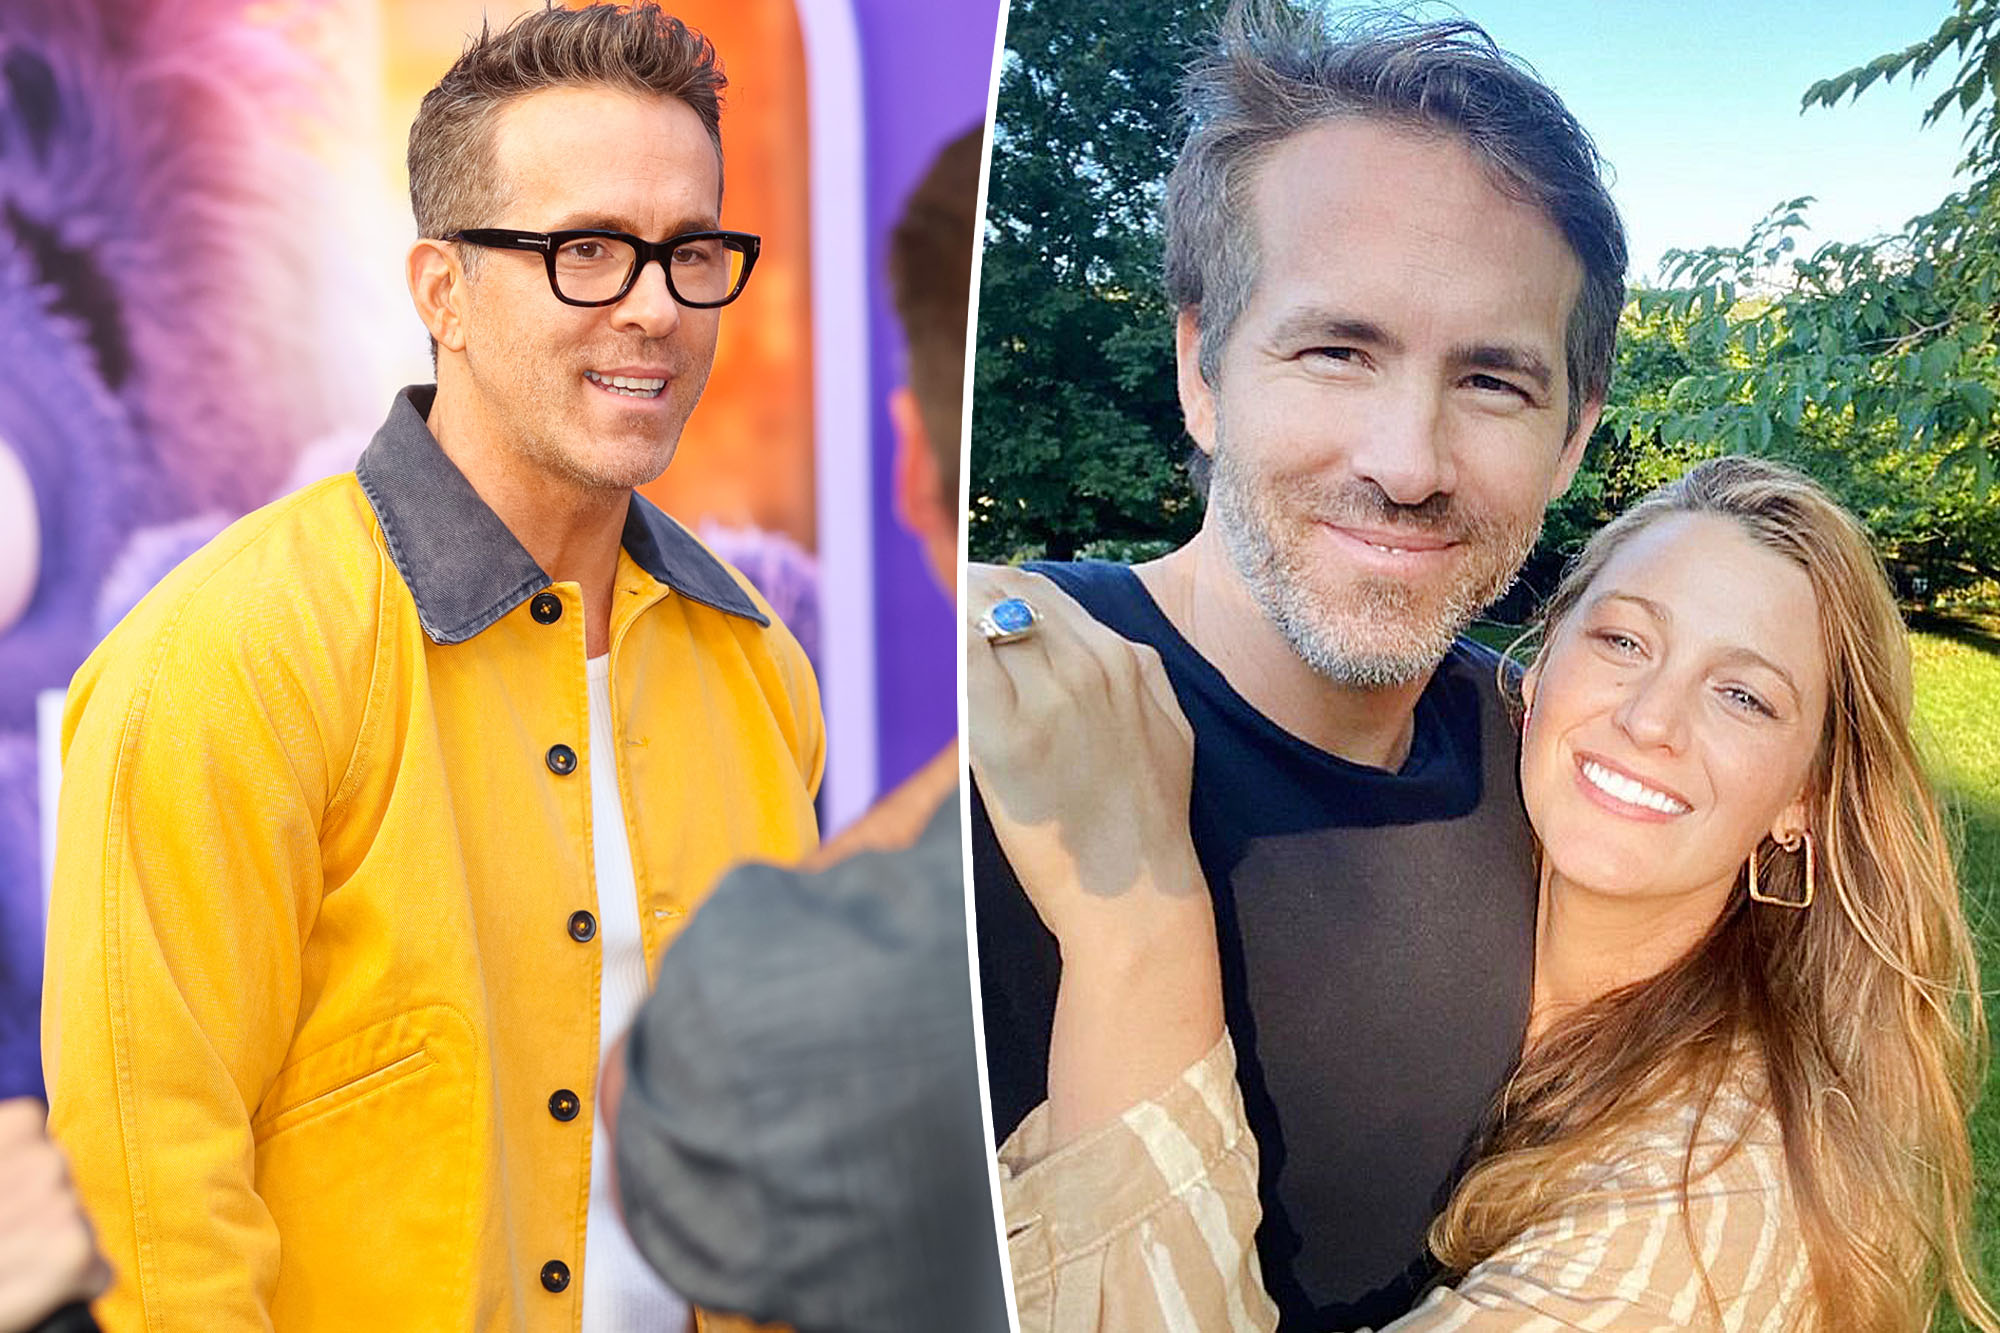 Ryan Reynolds and Blake Lively: A Love Story